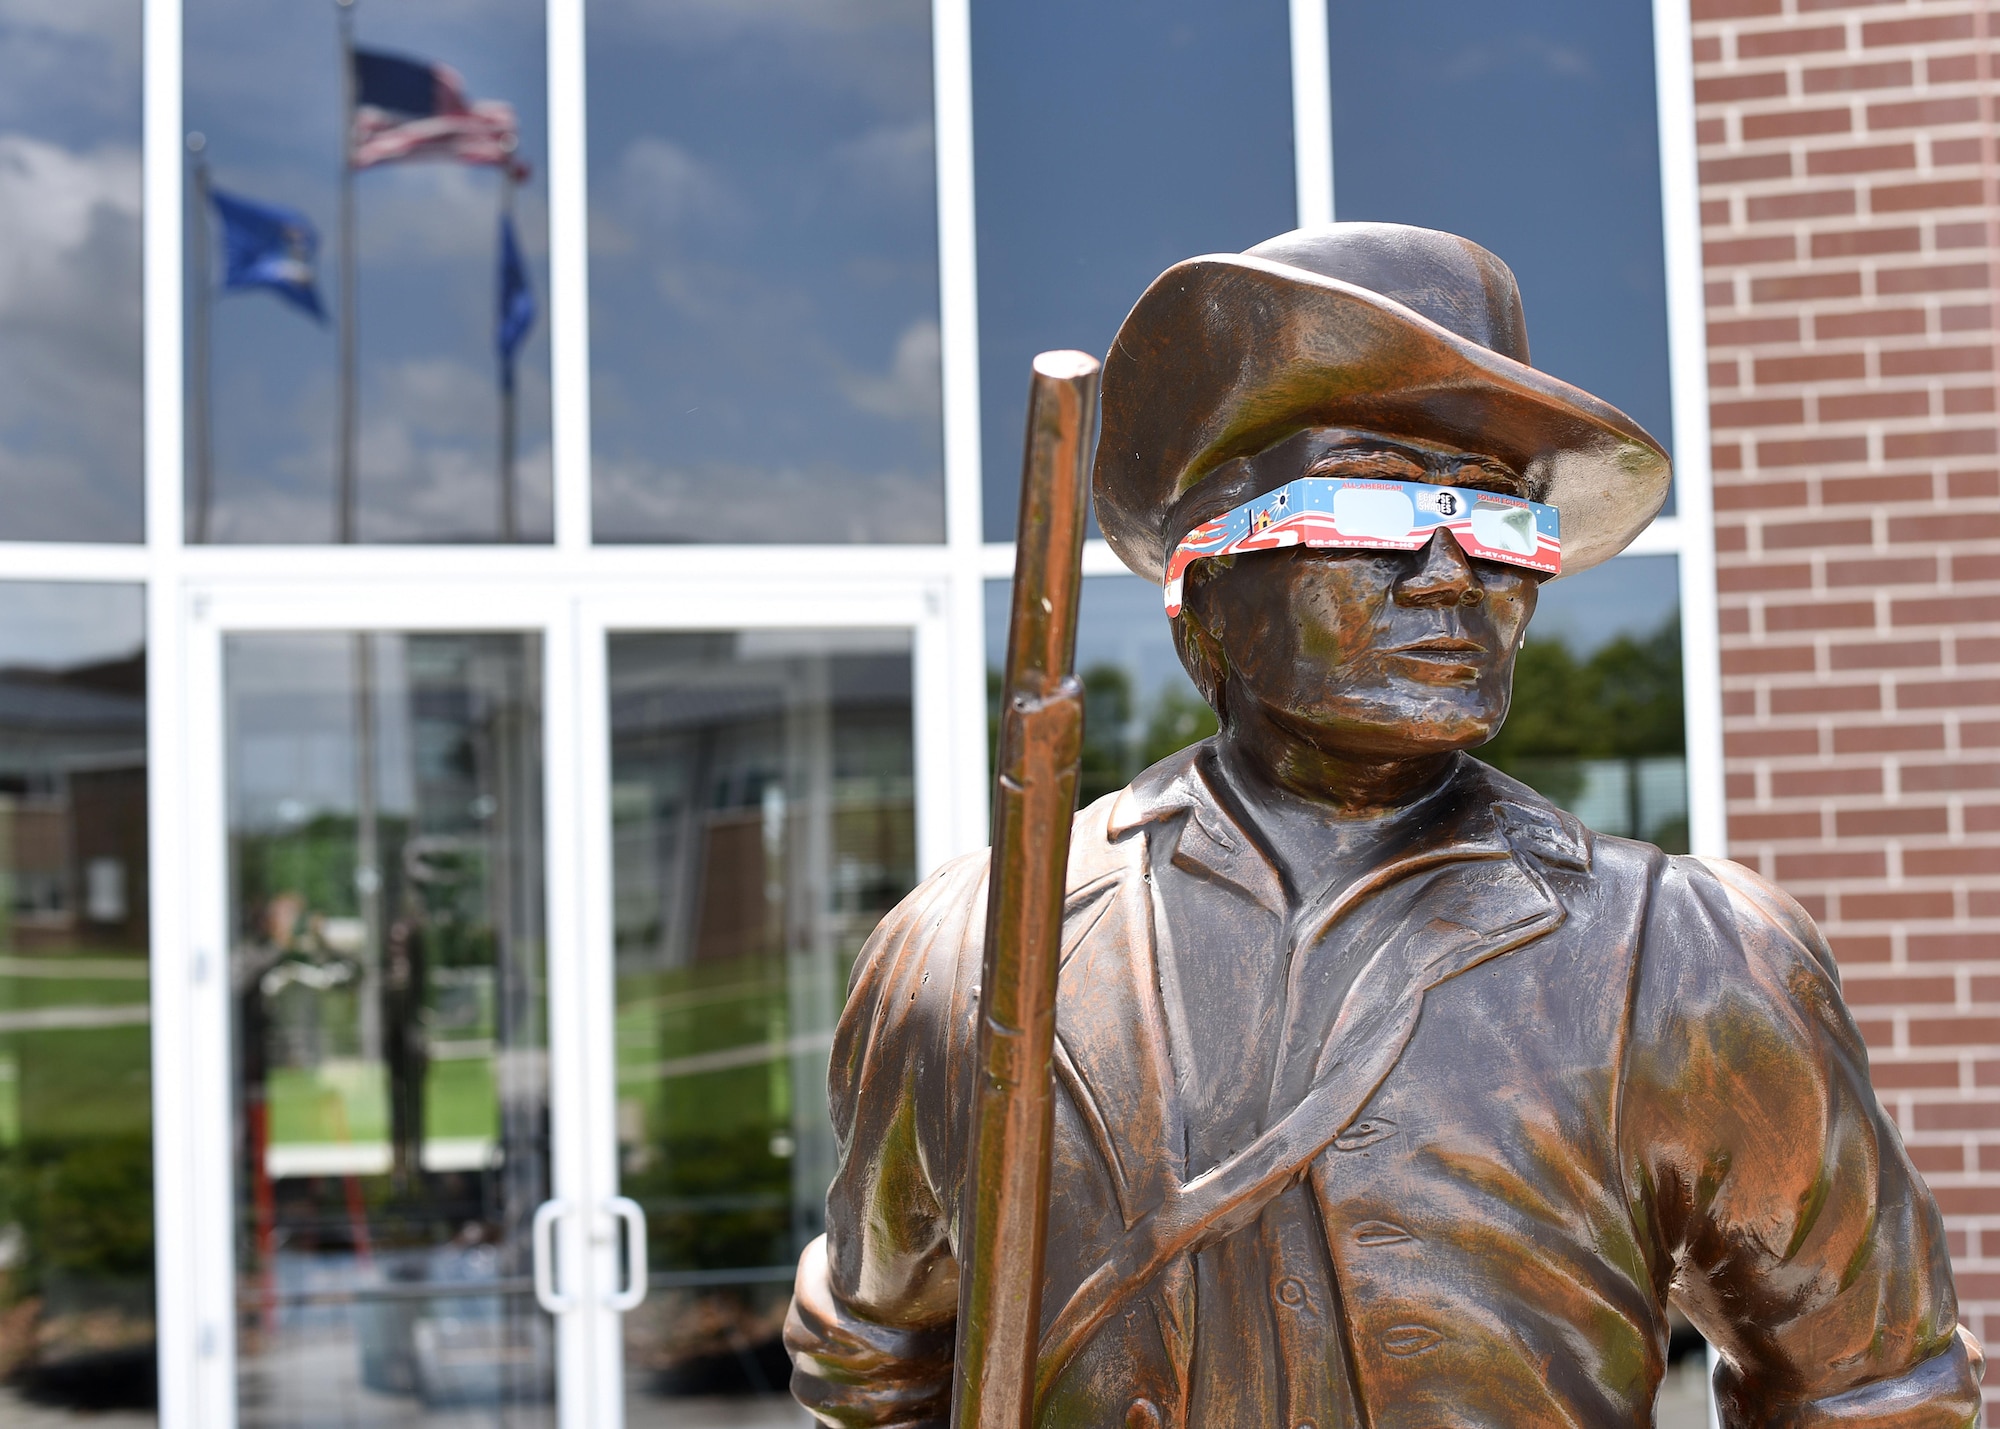 The Minuteman statue outside Patriot Hall at the Air National Guard’s I.G. Brown Training and Education Center dons a pair of eclipse glasses, June 22, 2017, to emphasize the need for safe viewing of the coming solar eclipse. The training center as well as the rest of McGhee Tyson Air National Guard Base in Louisville, Tenn., is within the path of totality during the event, Monday, August 21, 2017. (U.S. Air National Guard photo by Master Sgt. Mike R. Smith)